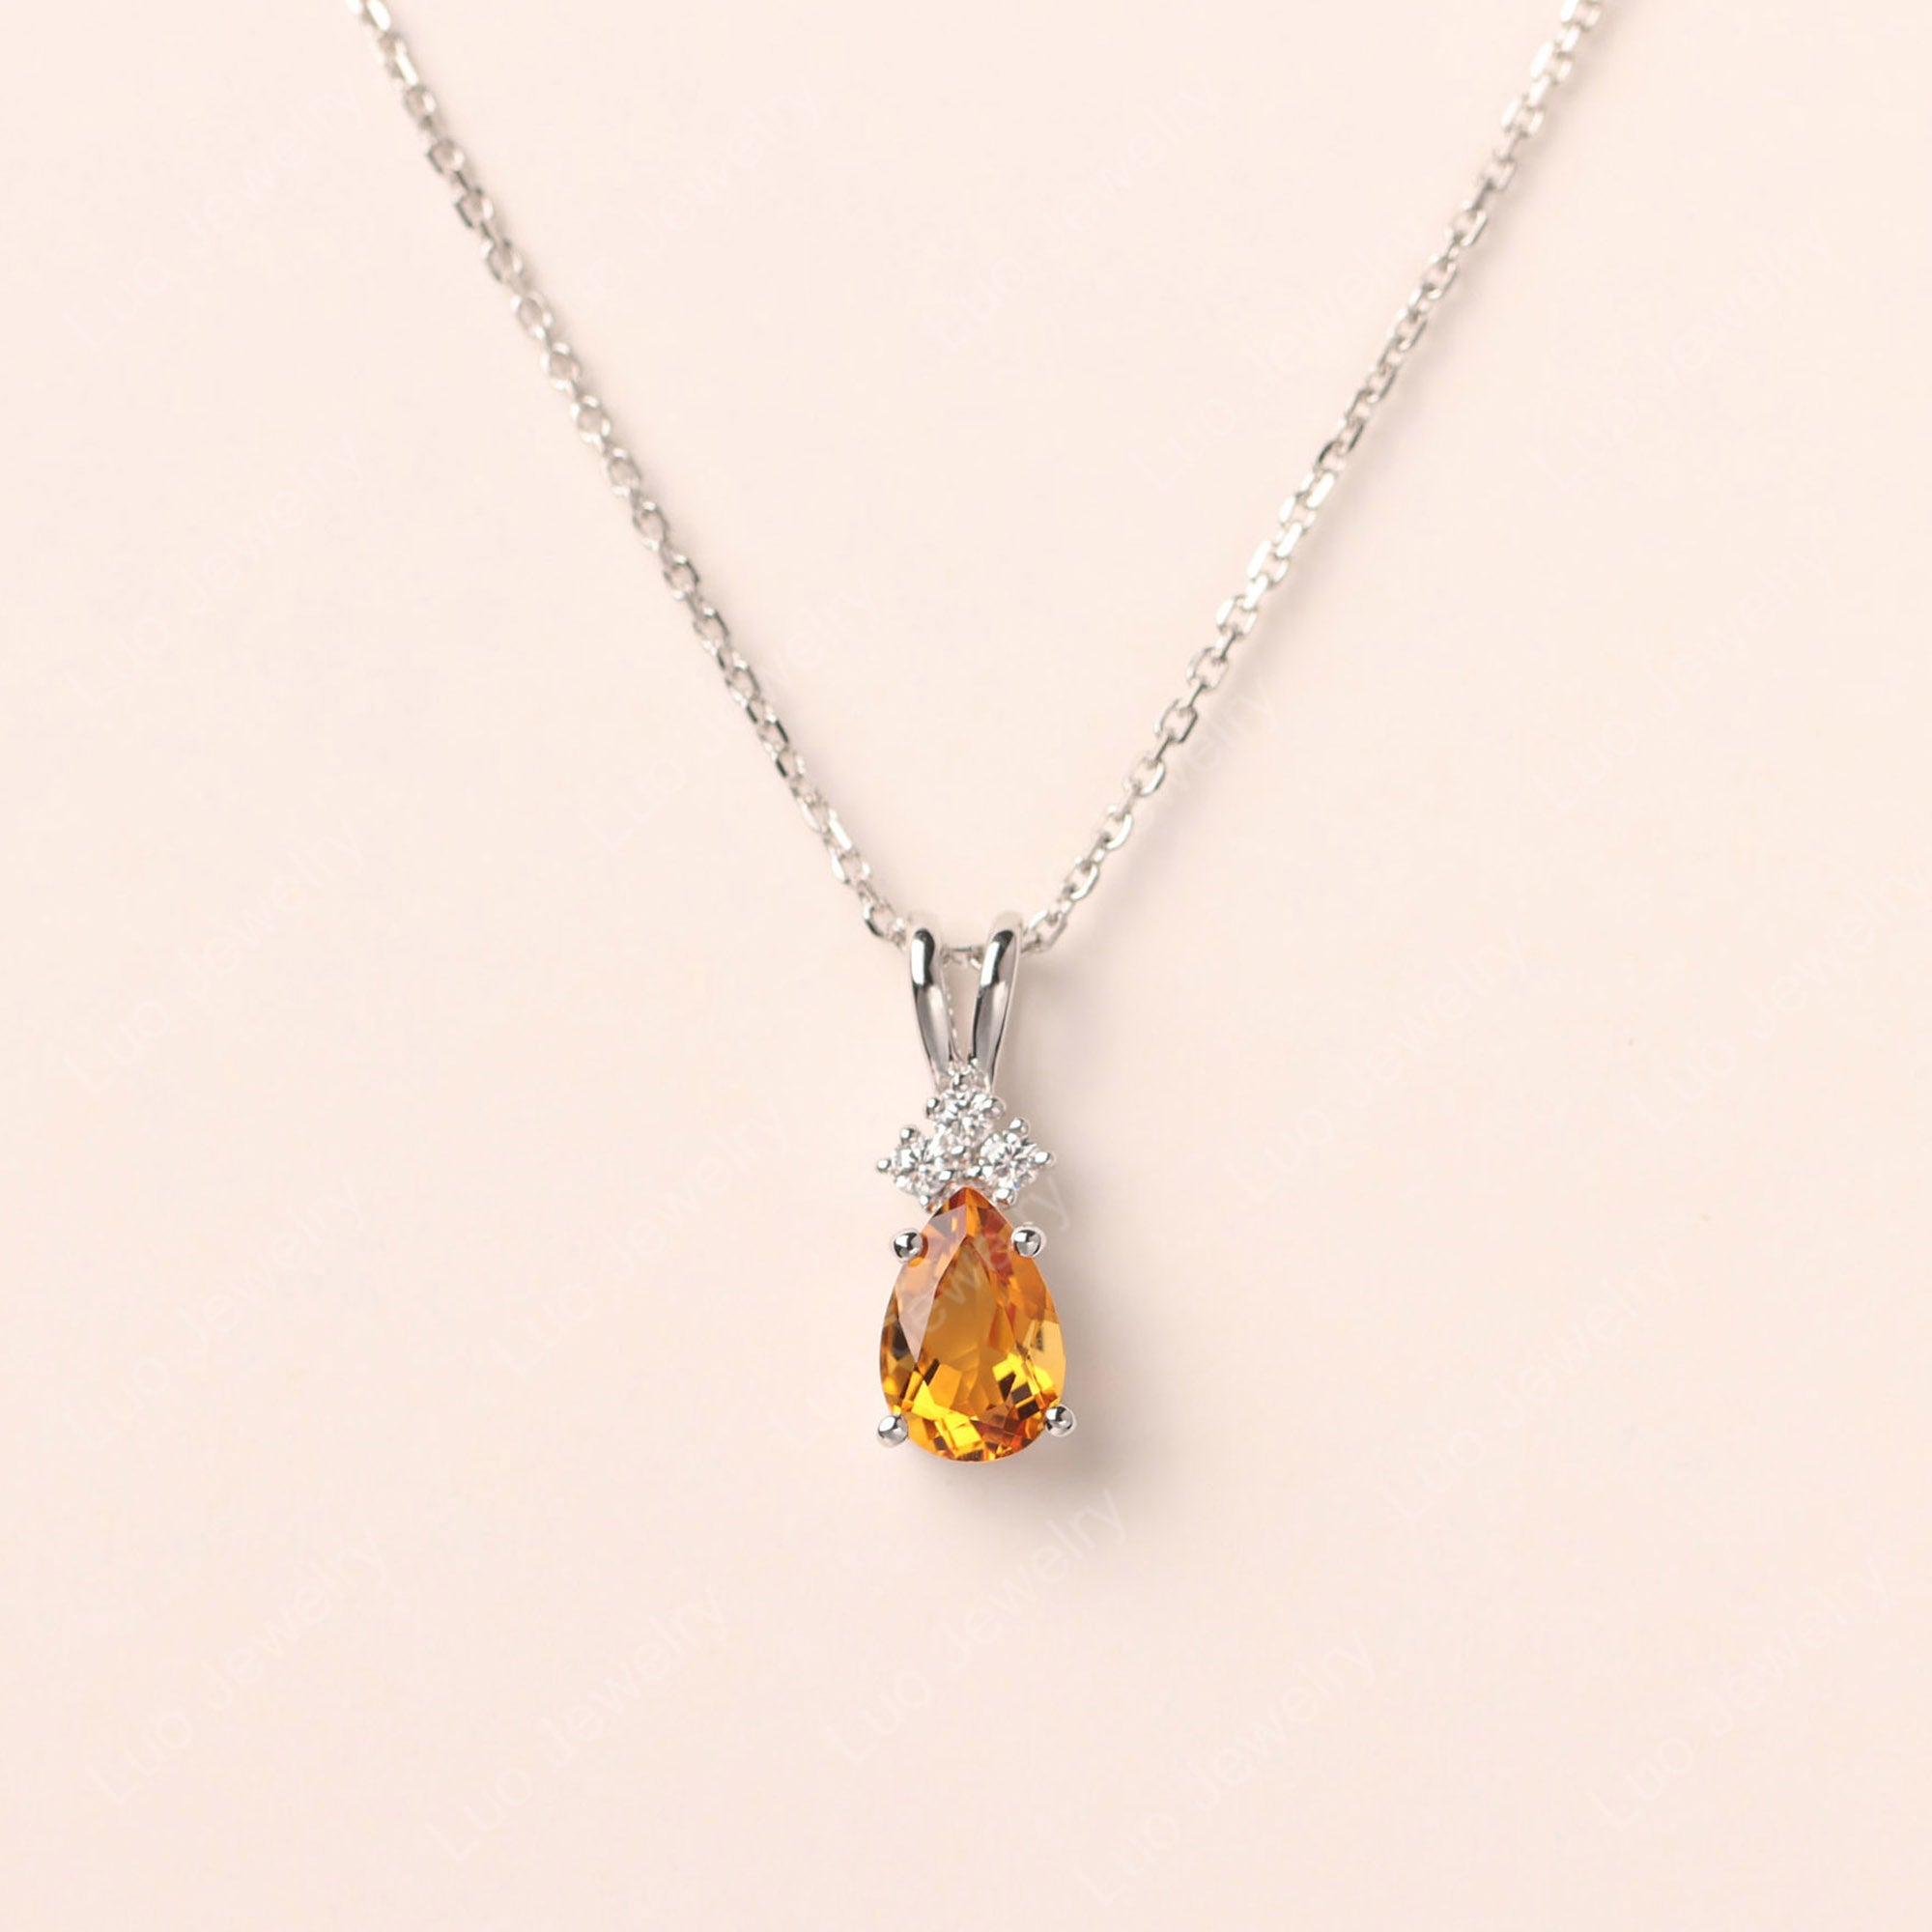 Pear Shaped Citrine Necklace